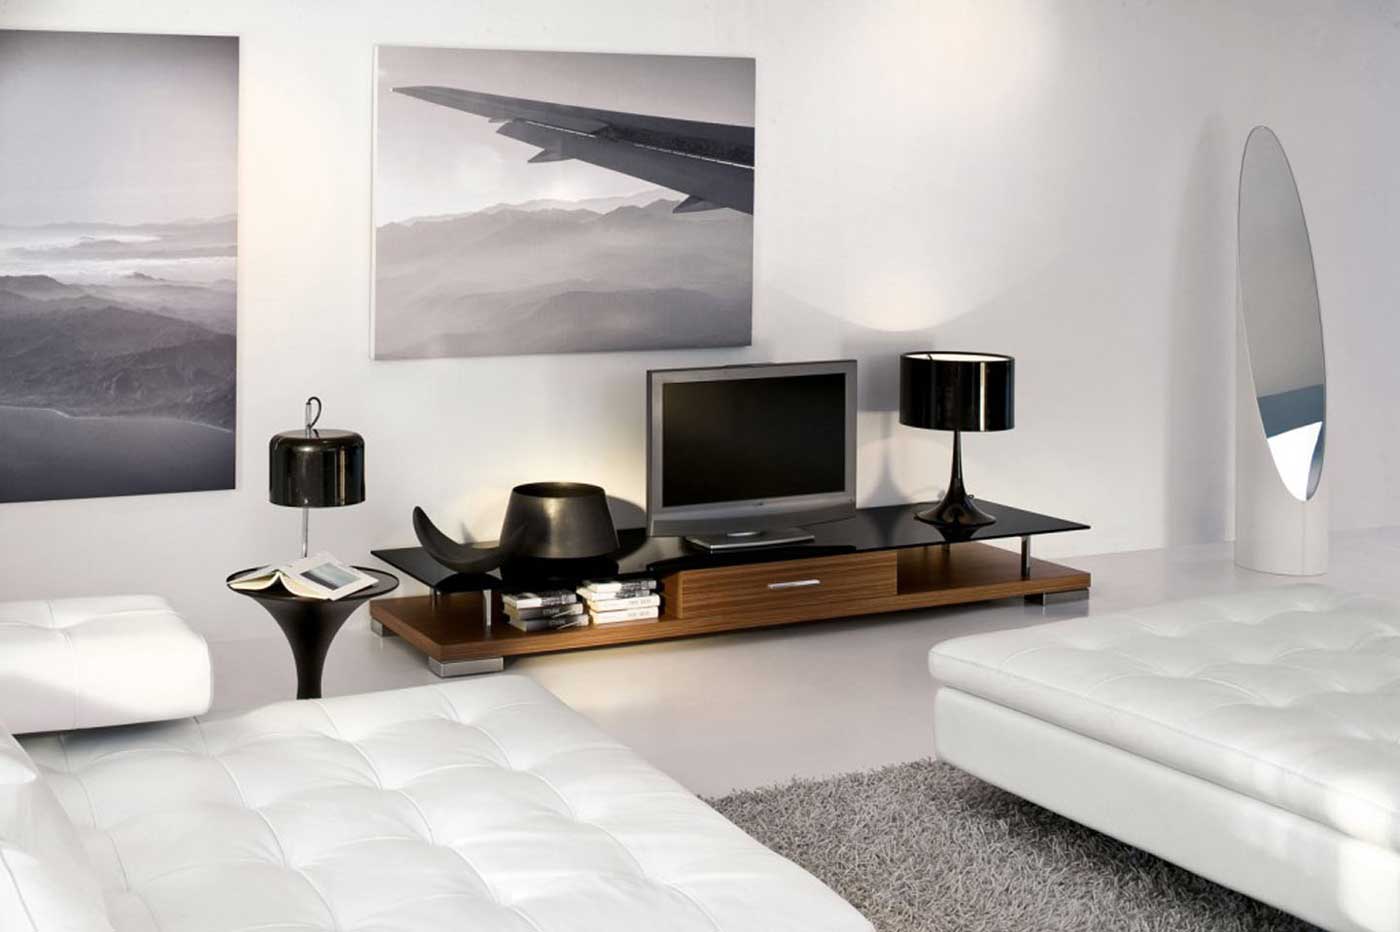 Modern Interior Living Contemporary Modern Interior Design For Living Room With Interesting White Wall Paint Color Ideas And Charming White Padded Sofa Bed Design Also Gray Feather Carpet Ideas Interior Design The Stylish And New Ideas Of Modern Interior Design